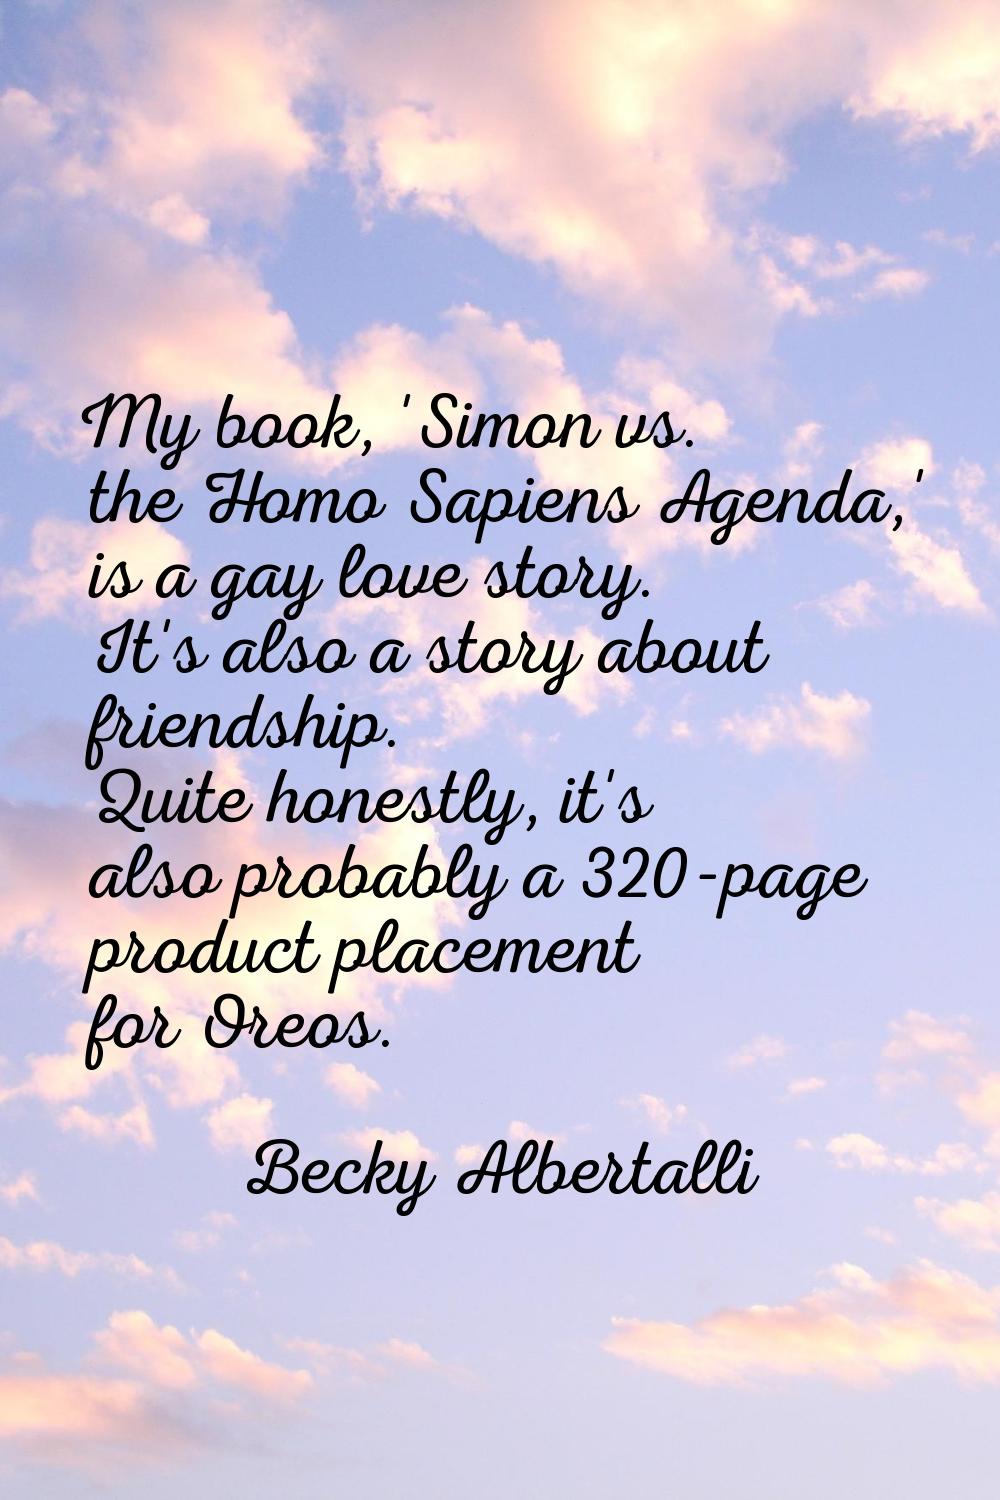 My book, 'Simon vs. the Homo Sapiens Agenda,' is a gay love story. It's also a story about friendsh